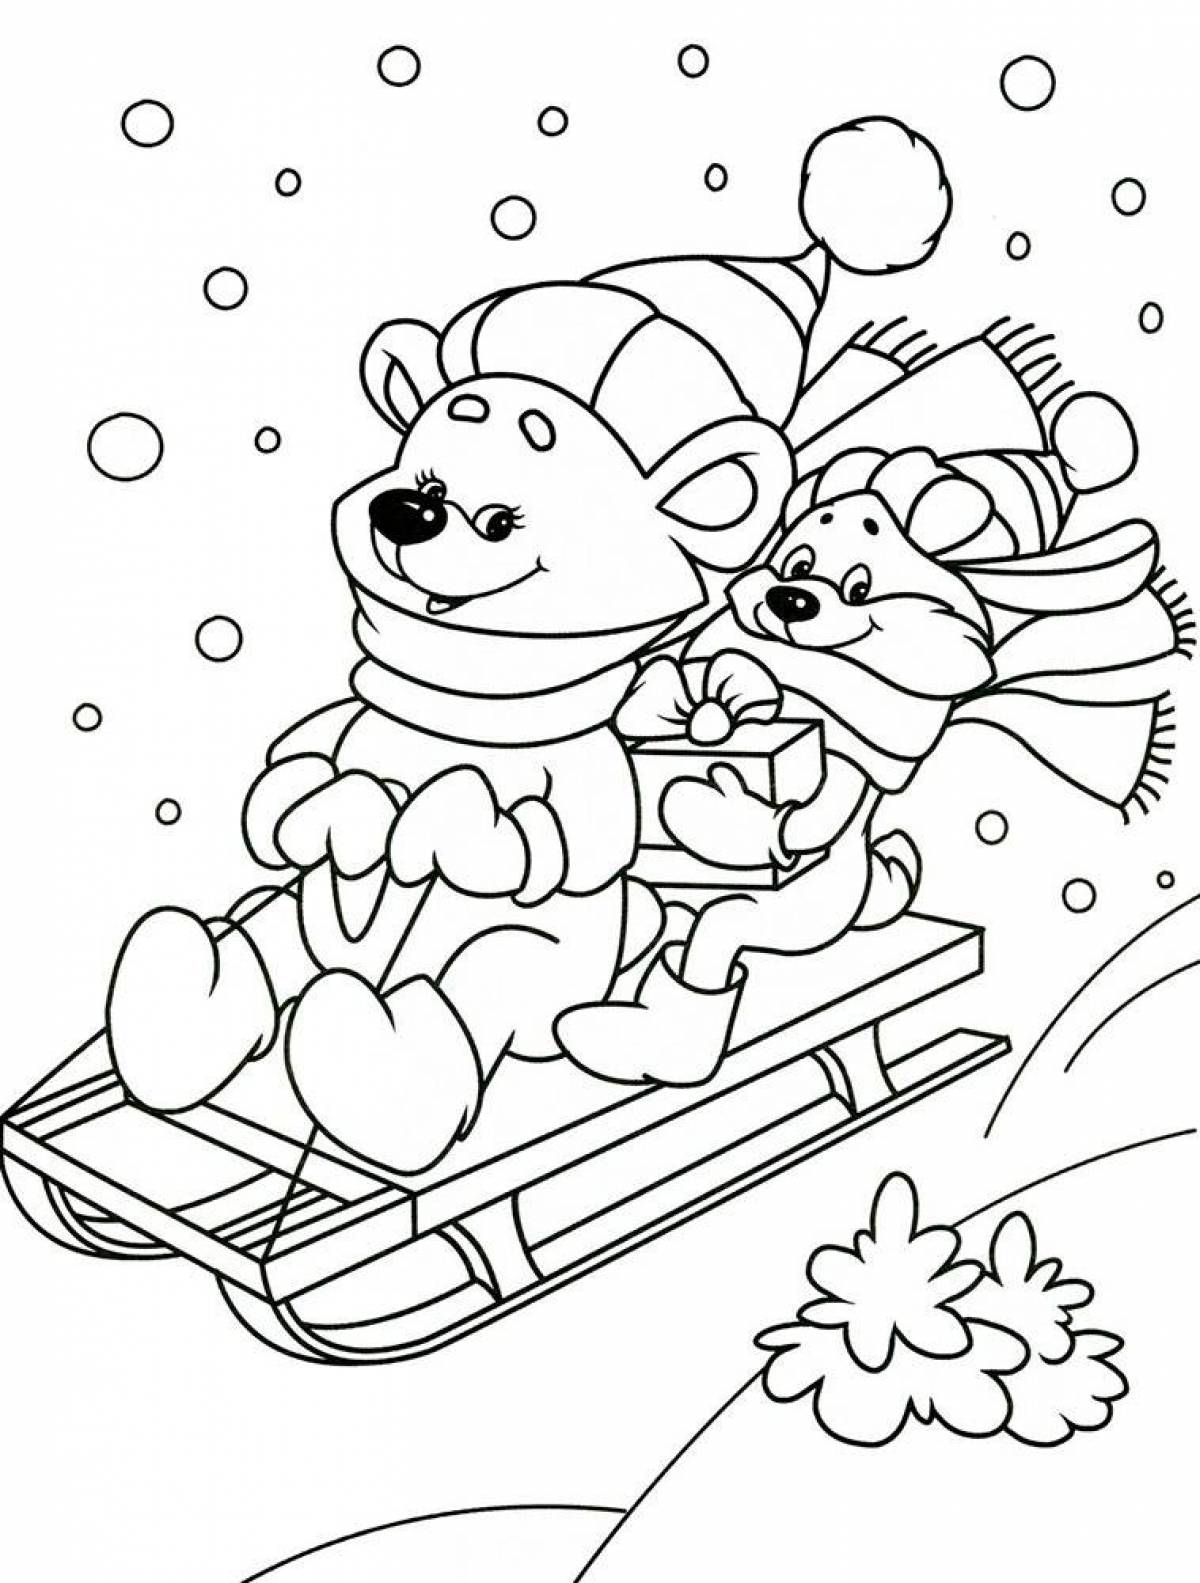 Bright coloring winter for children 5-6 years old